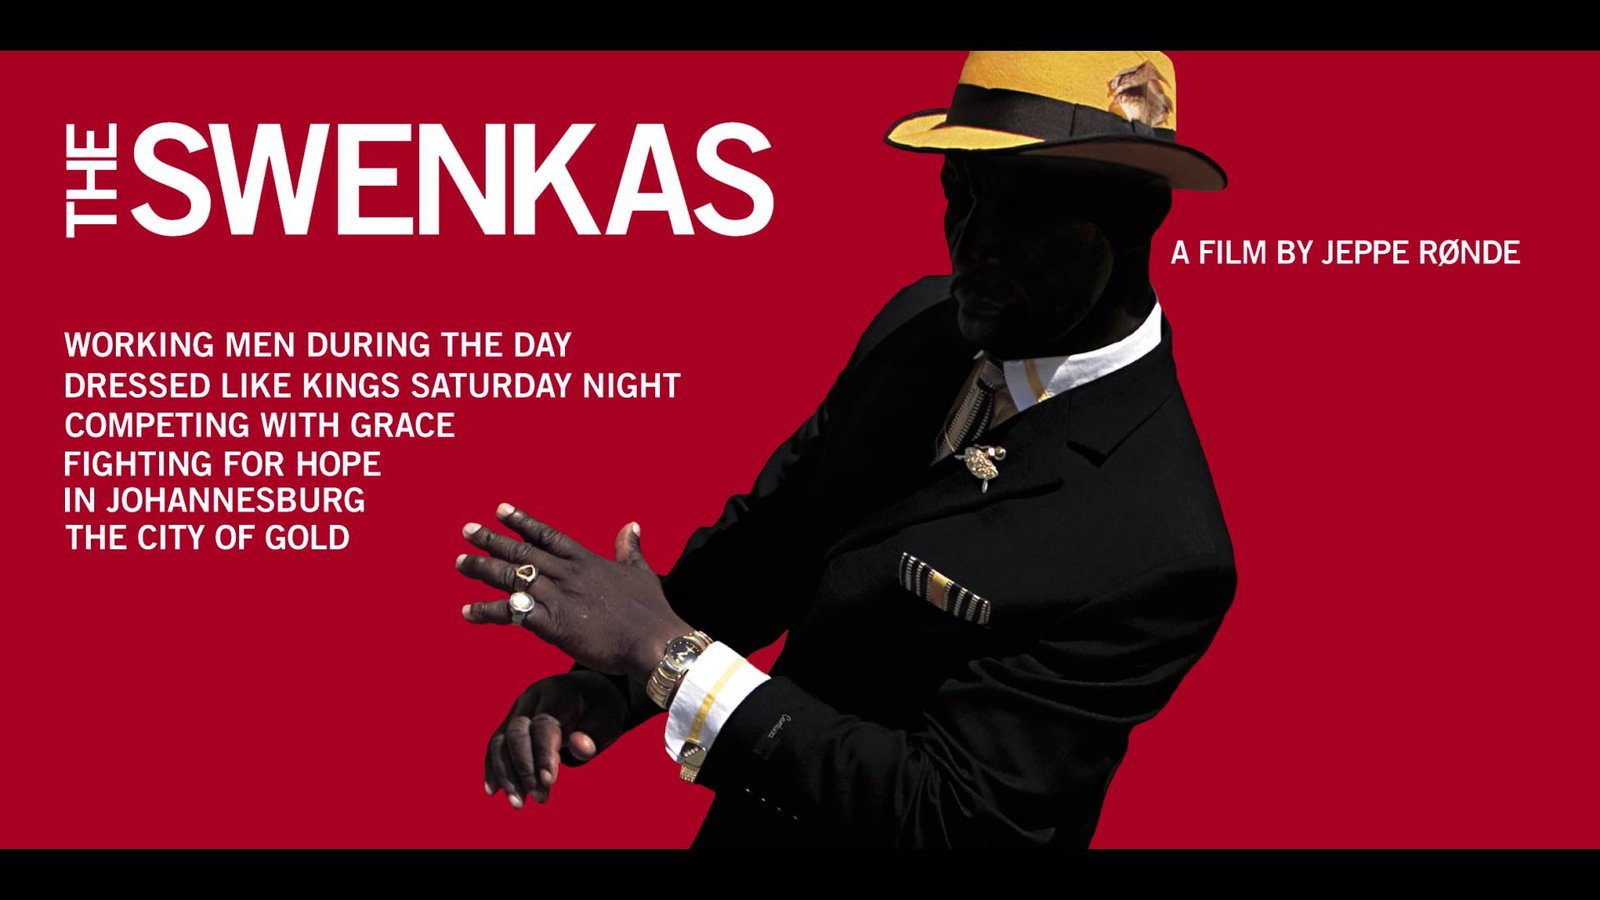 The Swenkas - A Male Fashion Show in South Africa